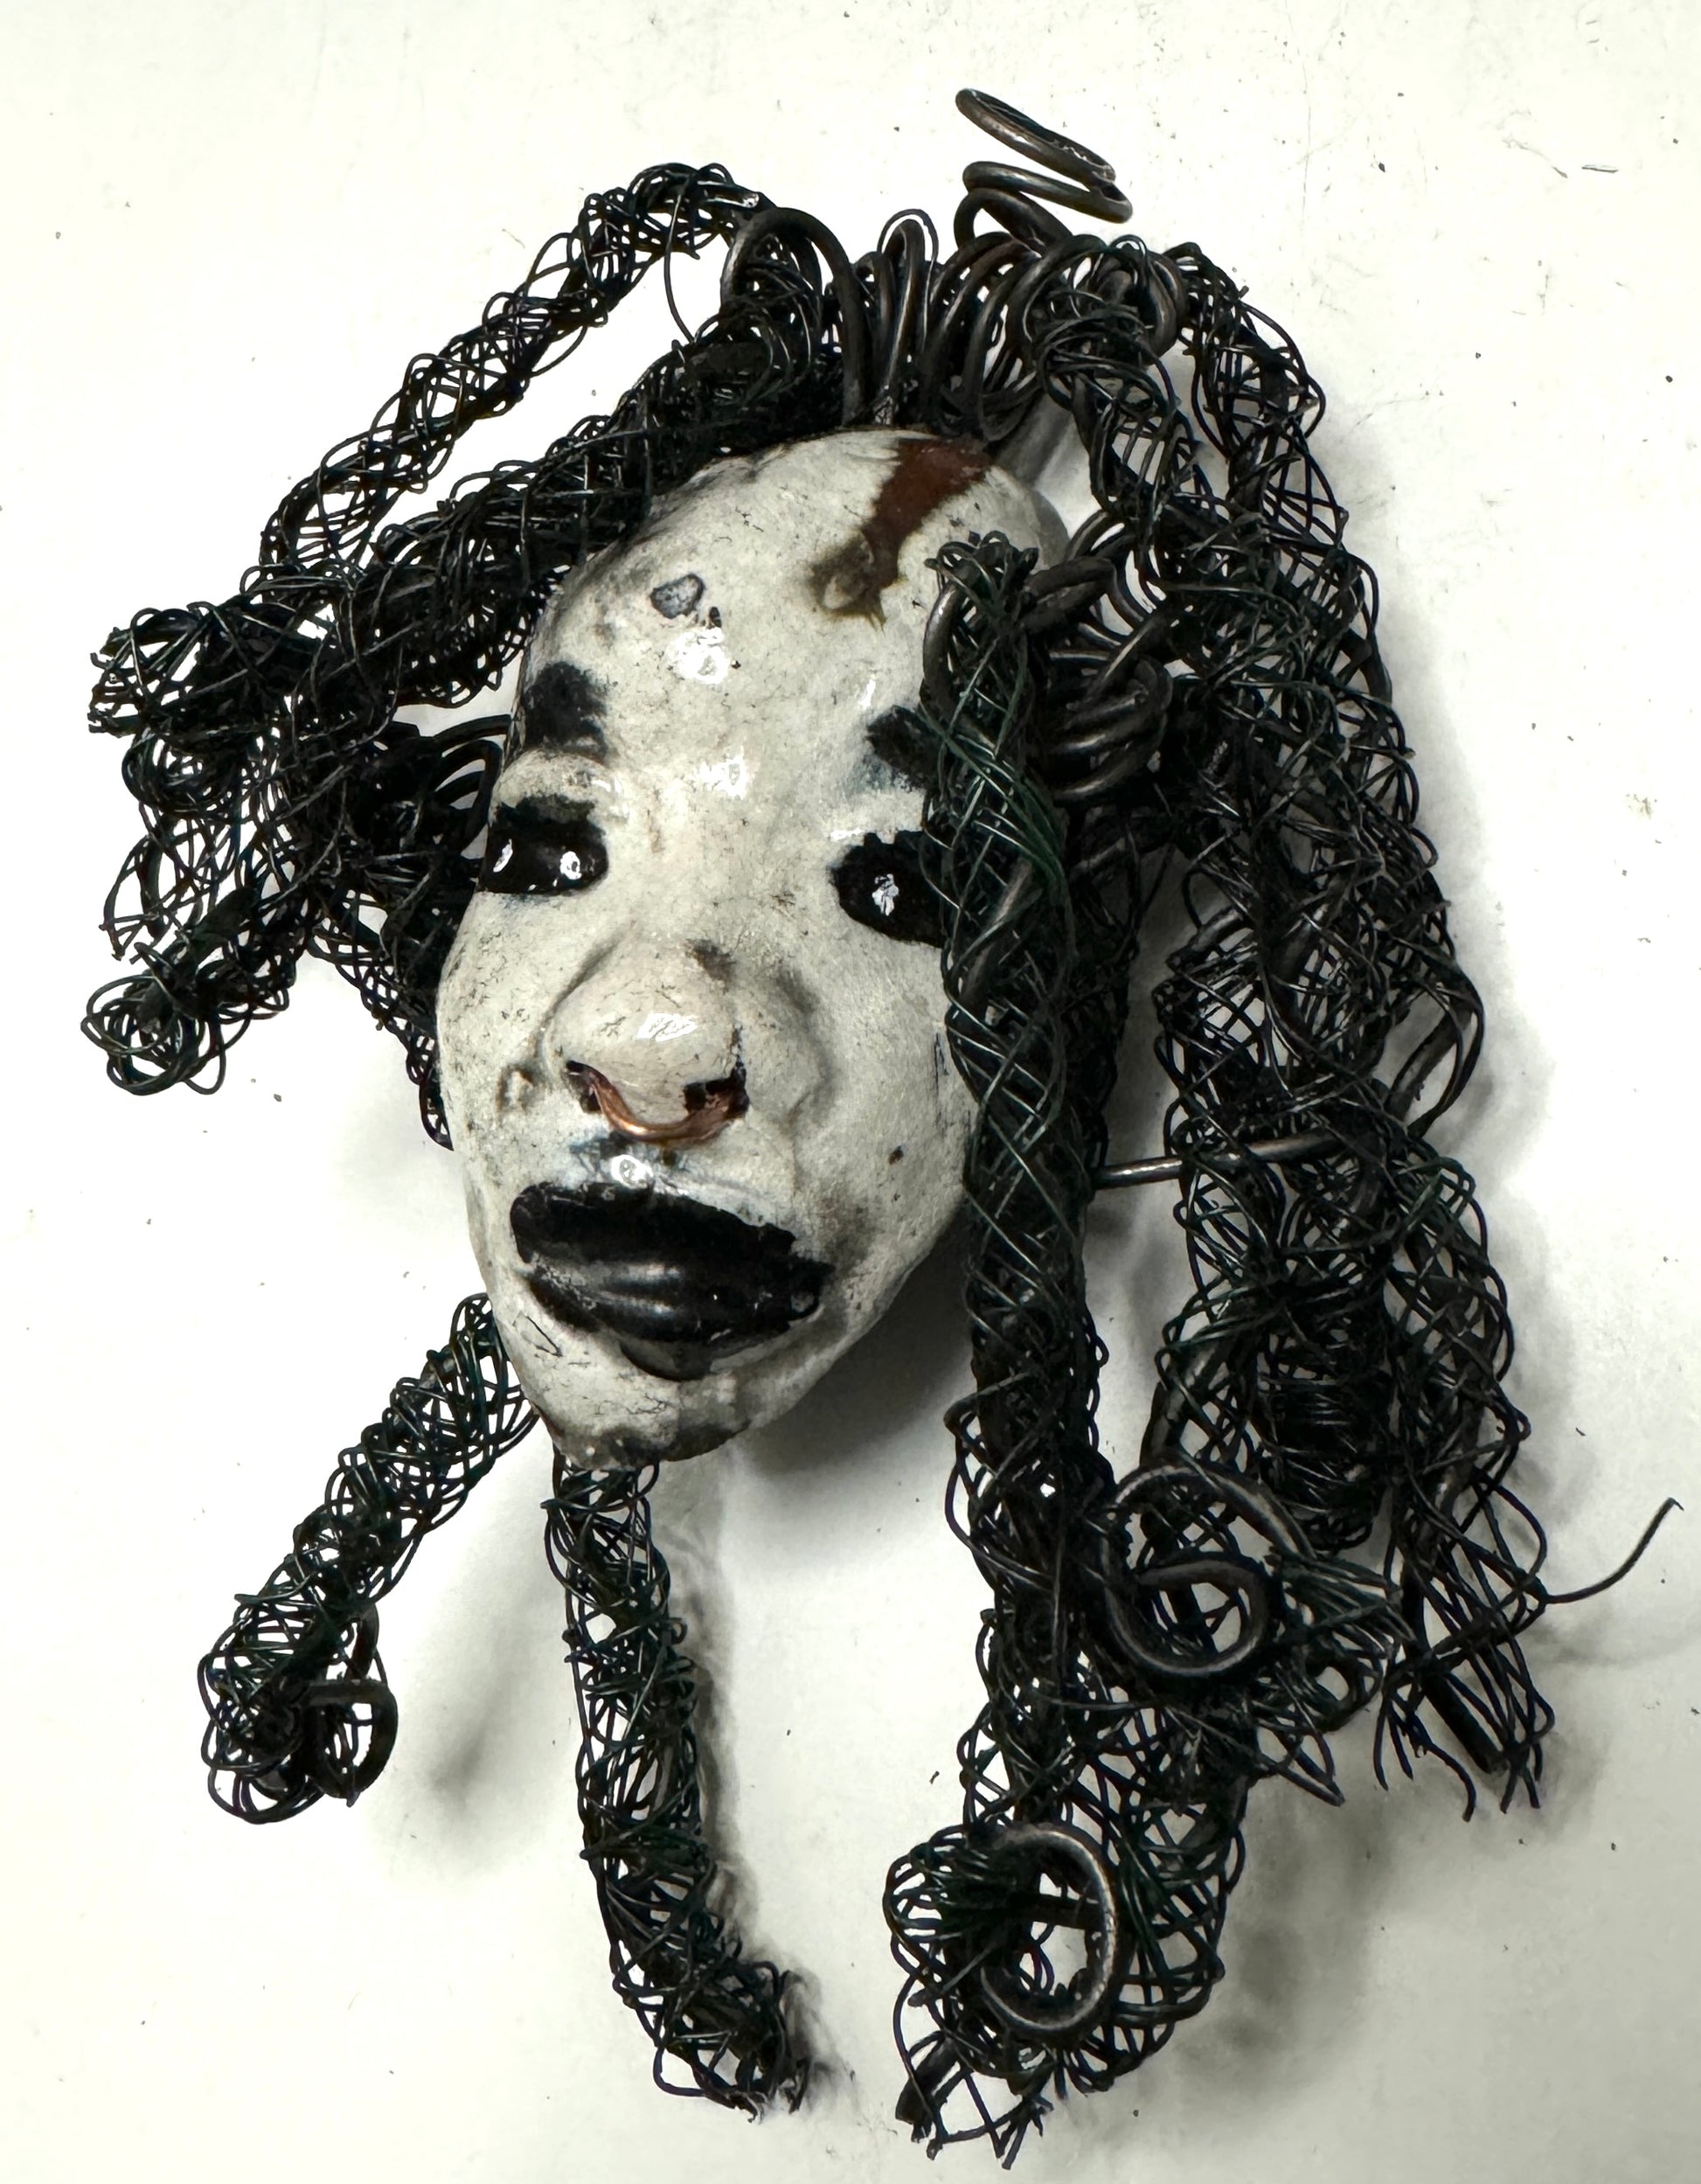 Bongani is a 4x 6” raku-fired mask featuring a pristine off-white color palette. Her intricately detailed hair is composed of nearly 15 feet of 24 gauge wire, delicately adorned. Set in a backdrop of nature, her portrait makes a wonderful addition to any outdoor art collector, or for decorating the home.